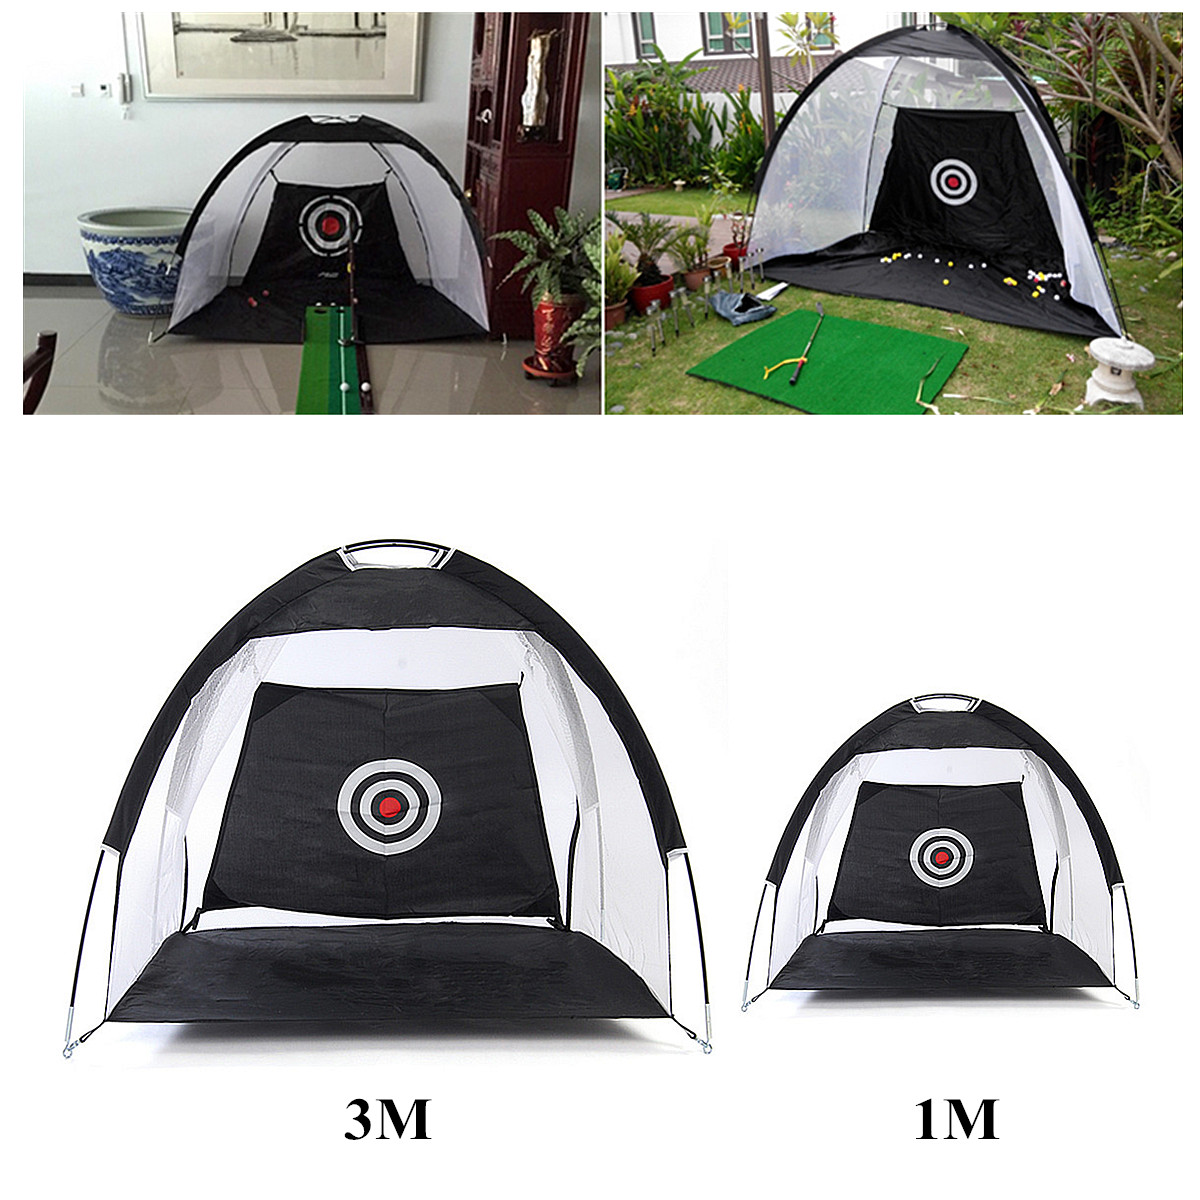 For-KidsAdult-1M3M-Foldable-Golf-Hitting-Net-Driving-Cage-Practice-Tent-Indoor-Outdoor-Golf-Trainer-1633819-2